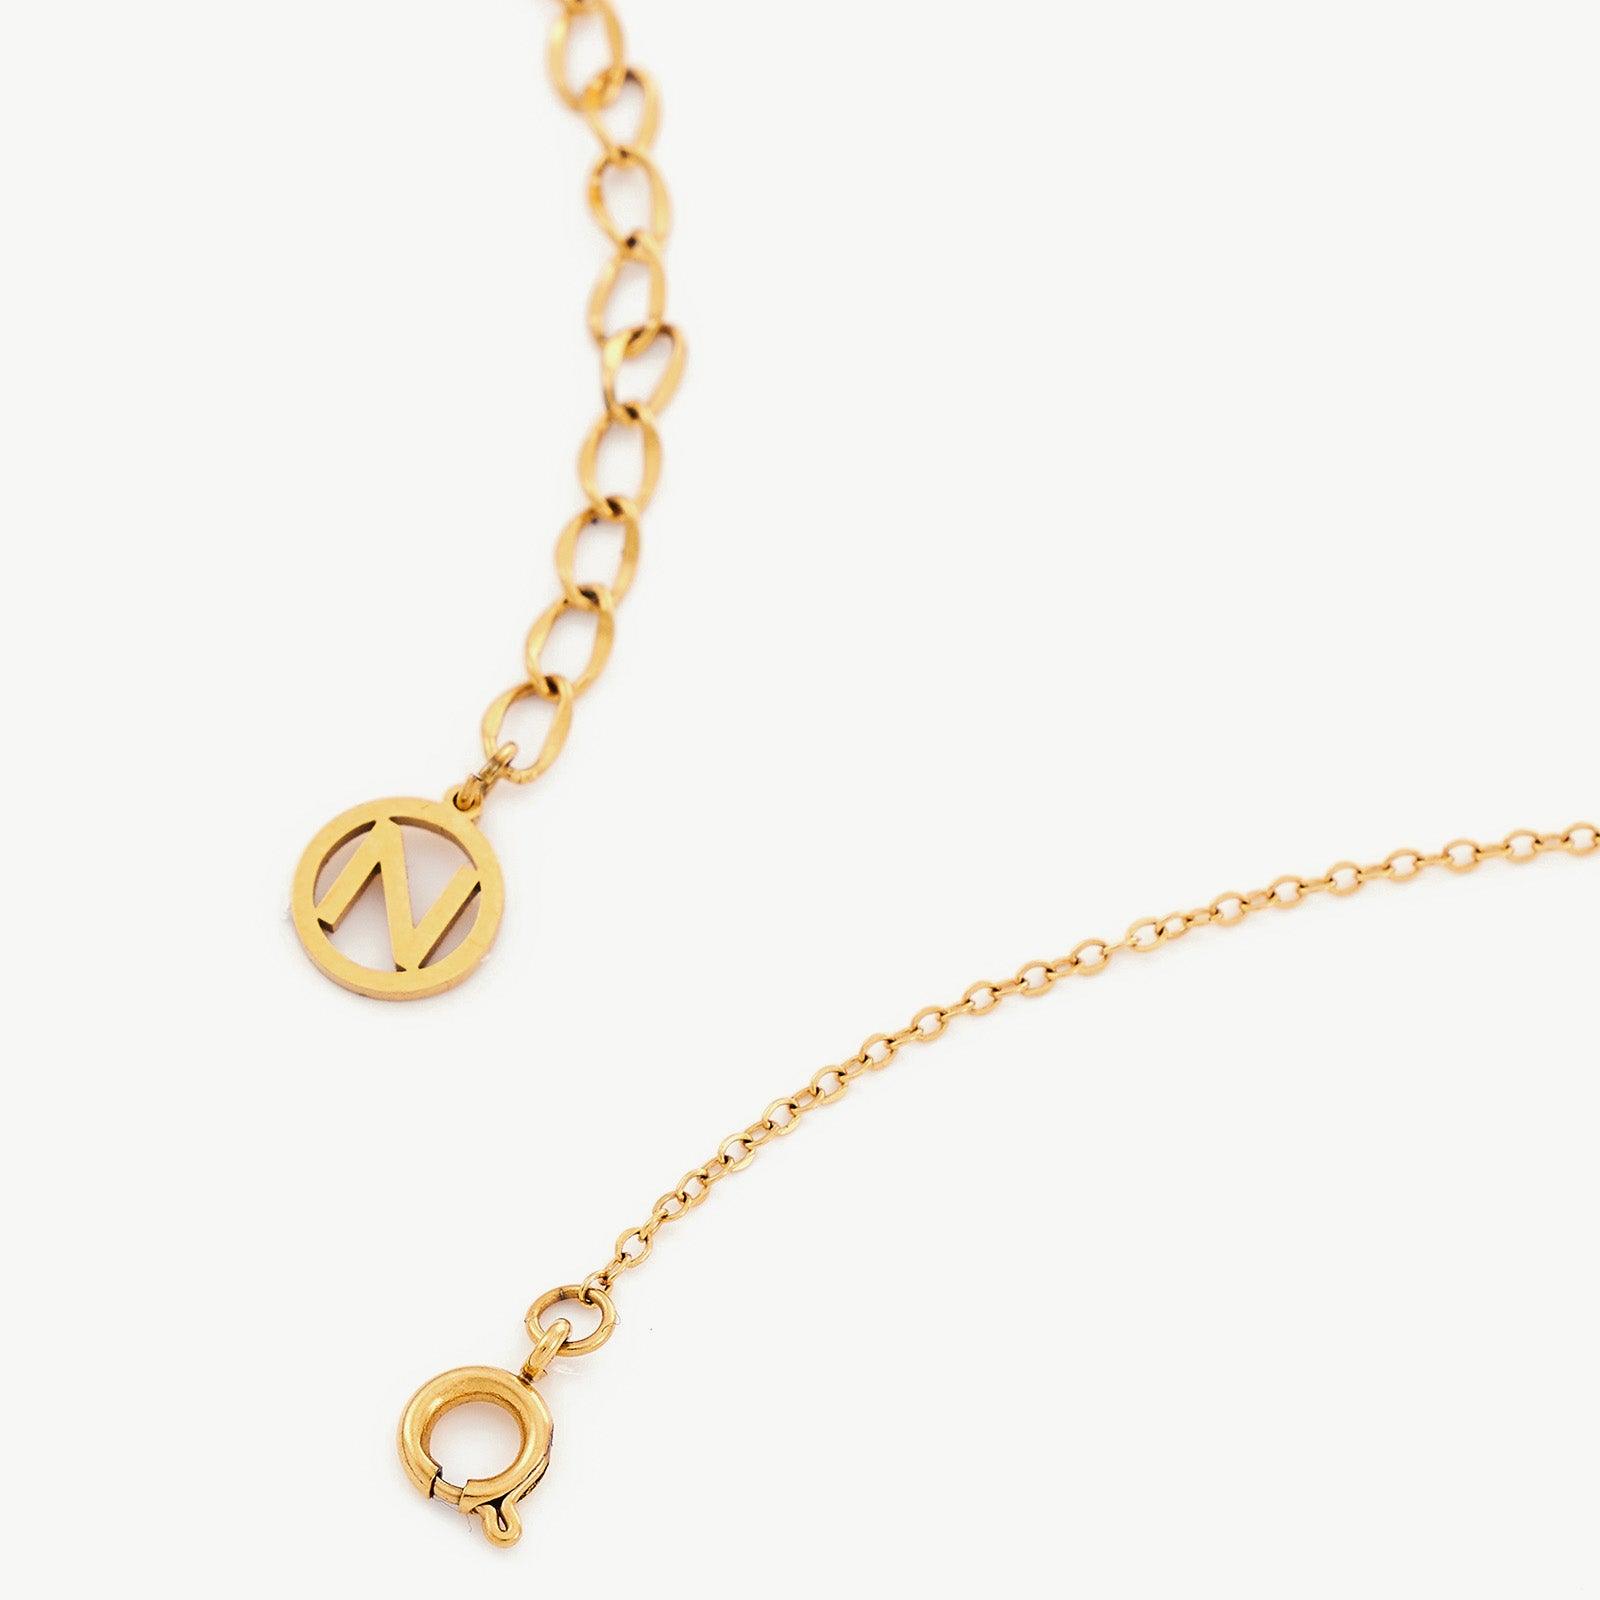 iamond Drop Necklace, exuding luxurious diamond sparkle, this necklace features a delicate chain with a dazzling diamond drop pendant for a glamorous and captivating look.